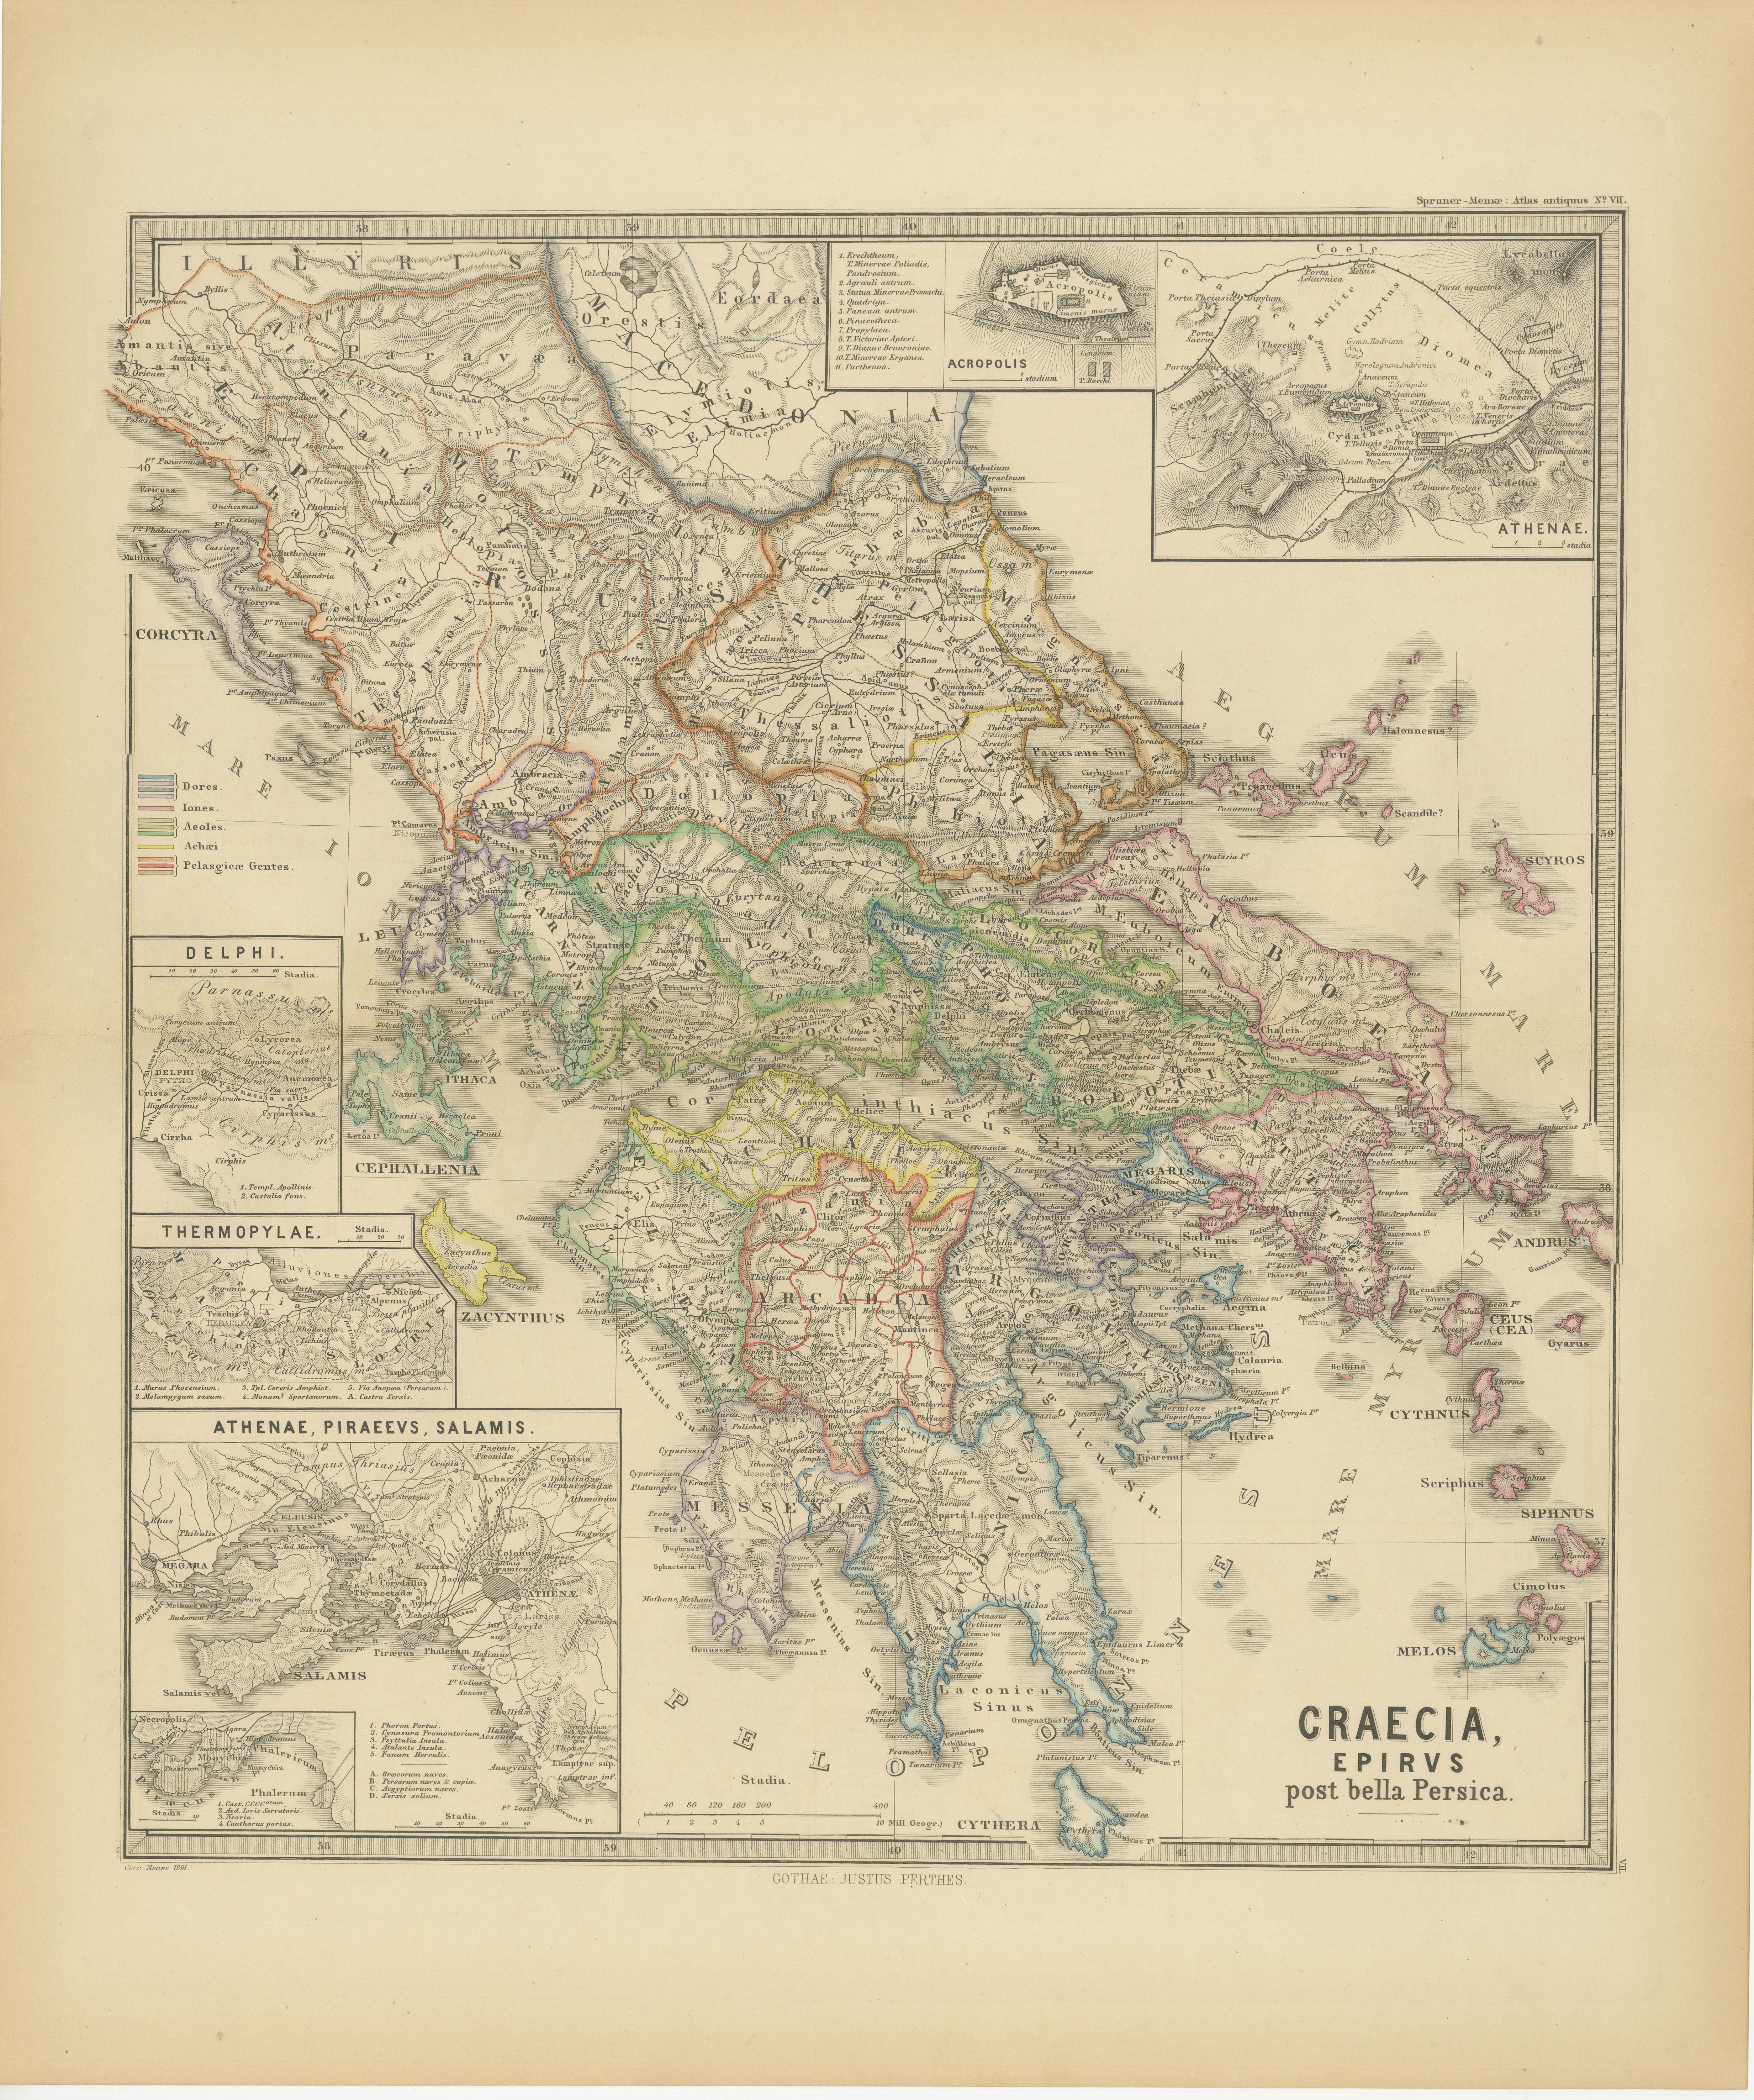 Paper Original Antique Map of Greece and Epirus after the Persian Wars, Published 1880 For Sale